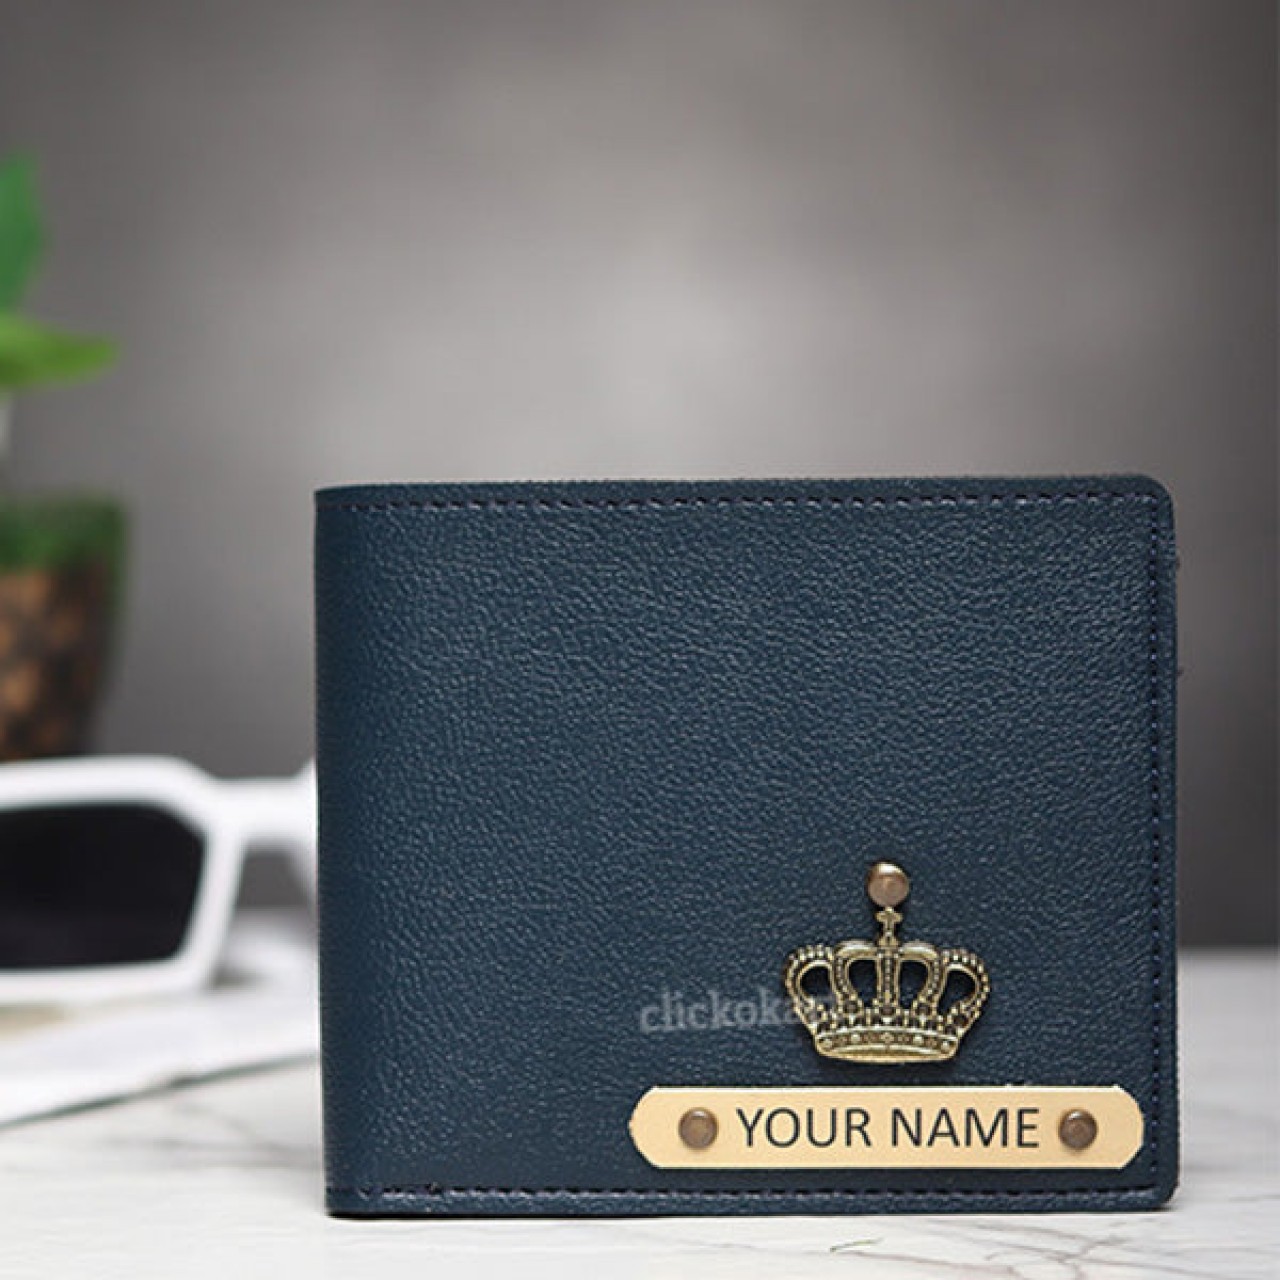 Personalized Men's Wallet With Box